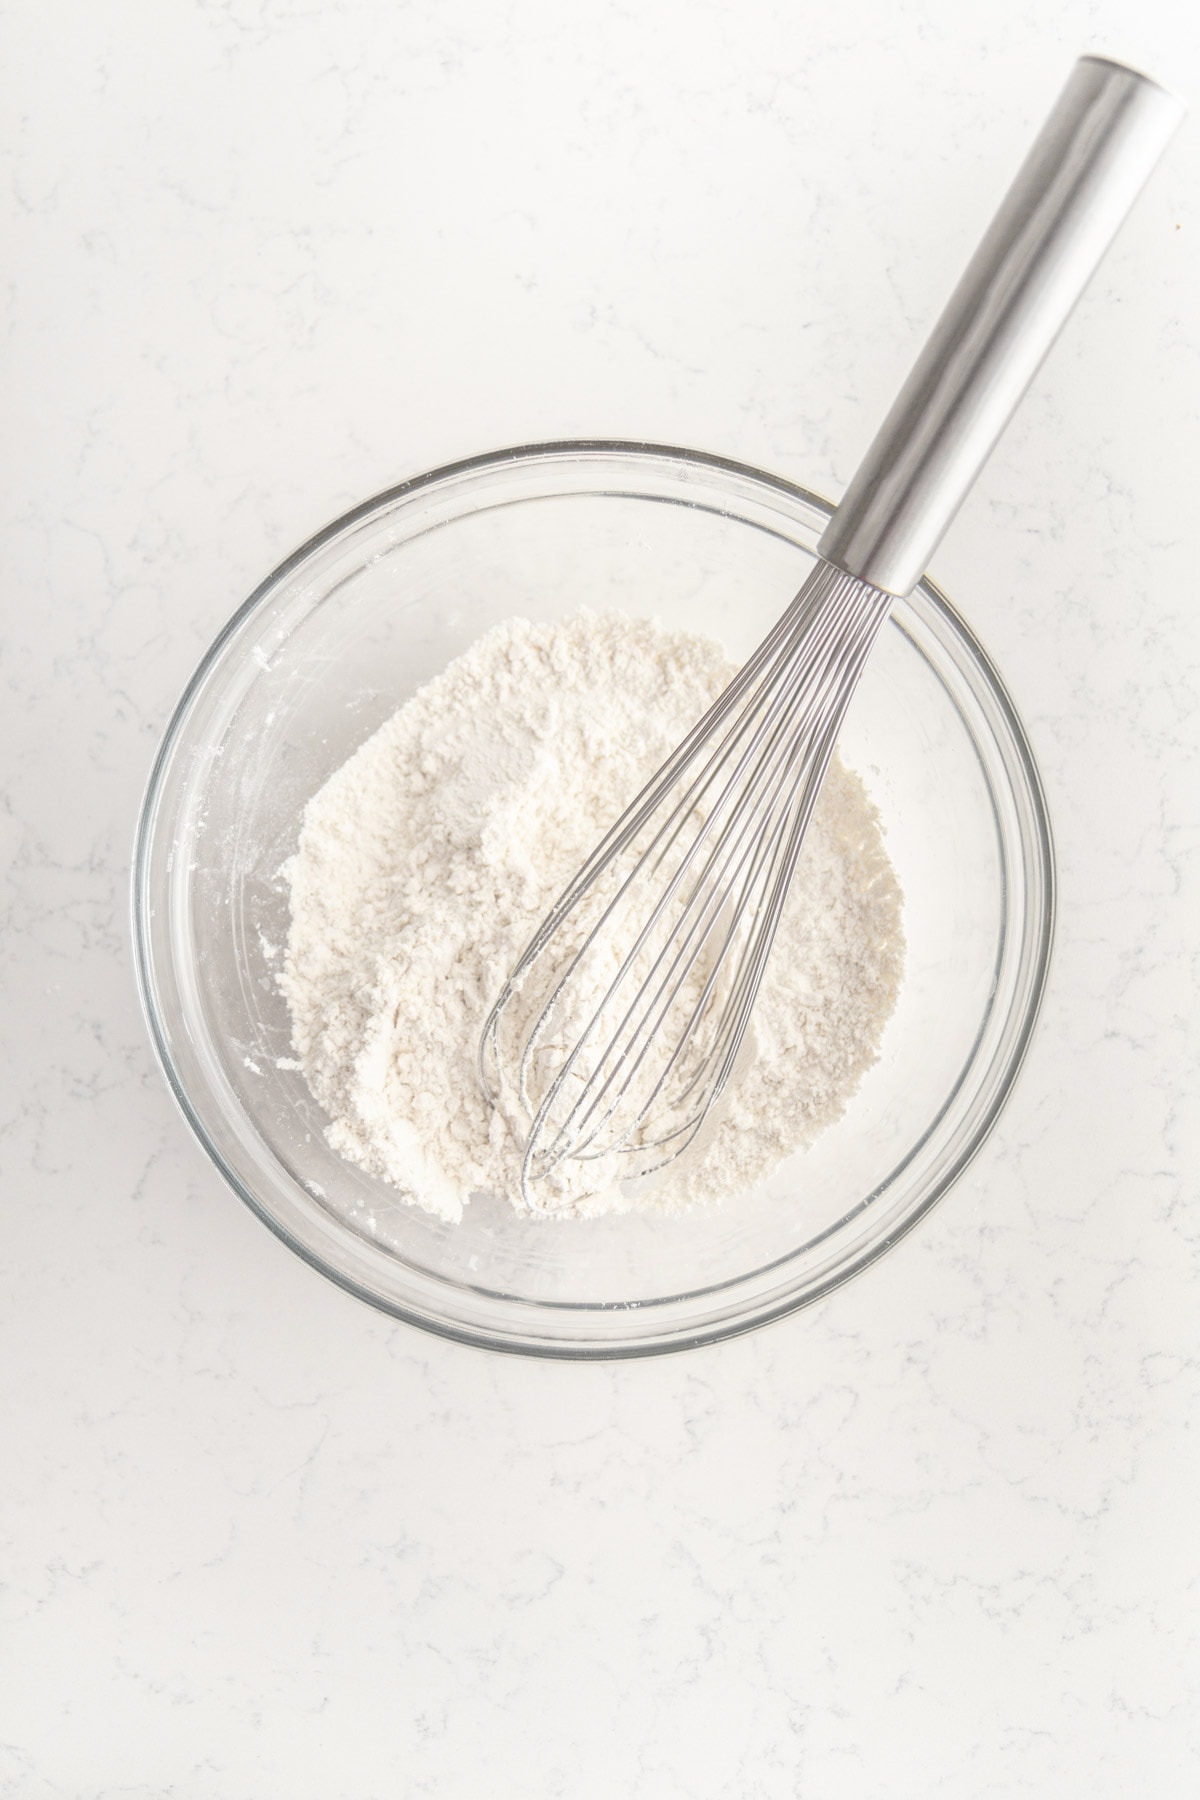 flour mixture in a bowl with a whisk